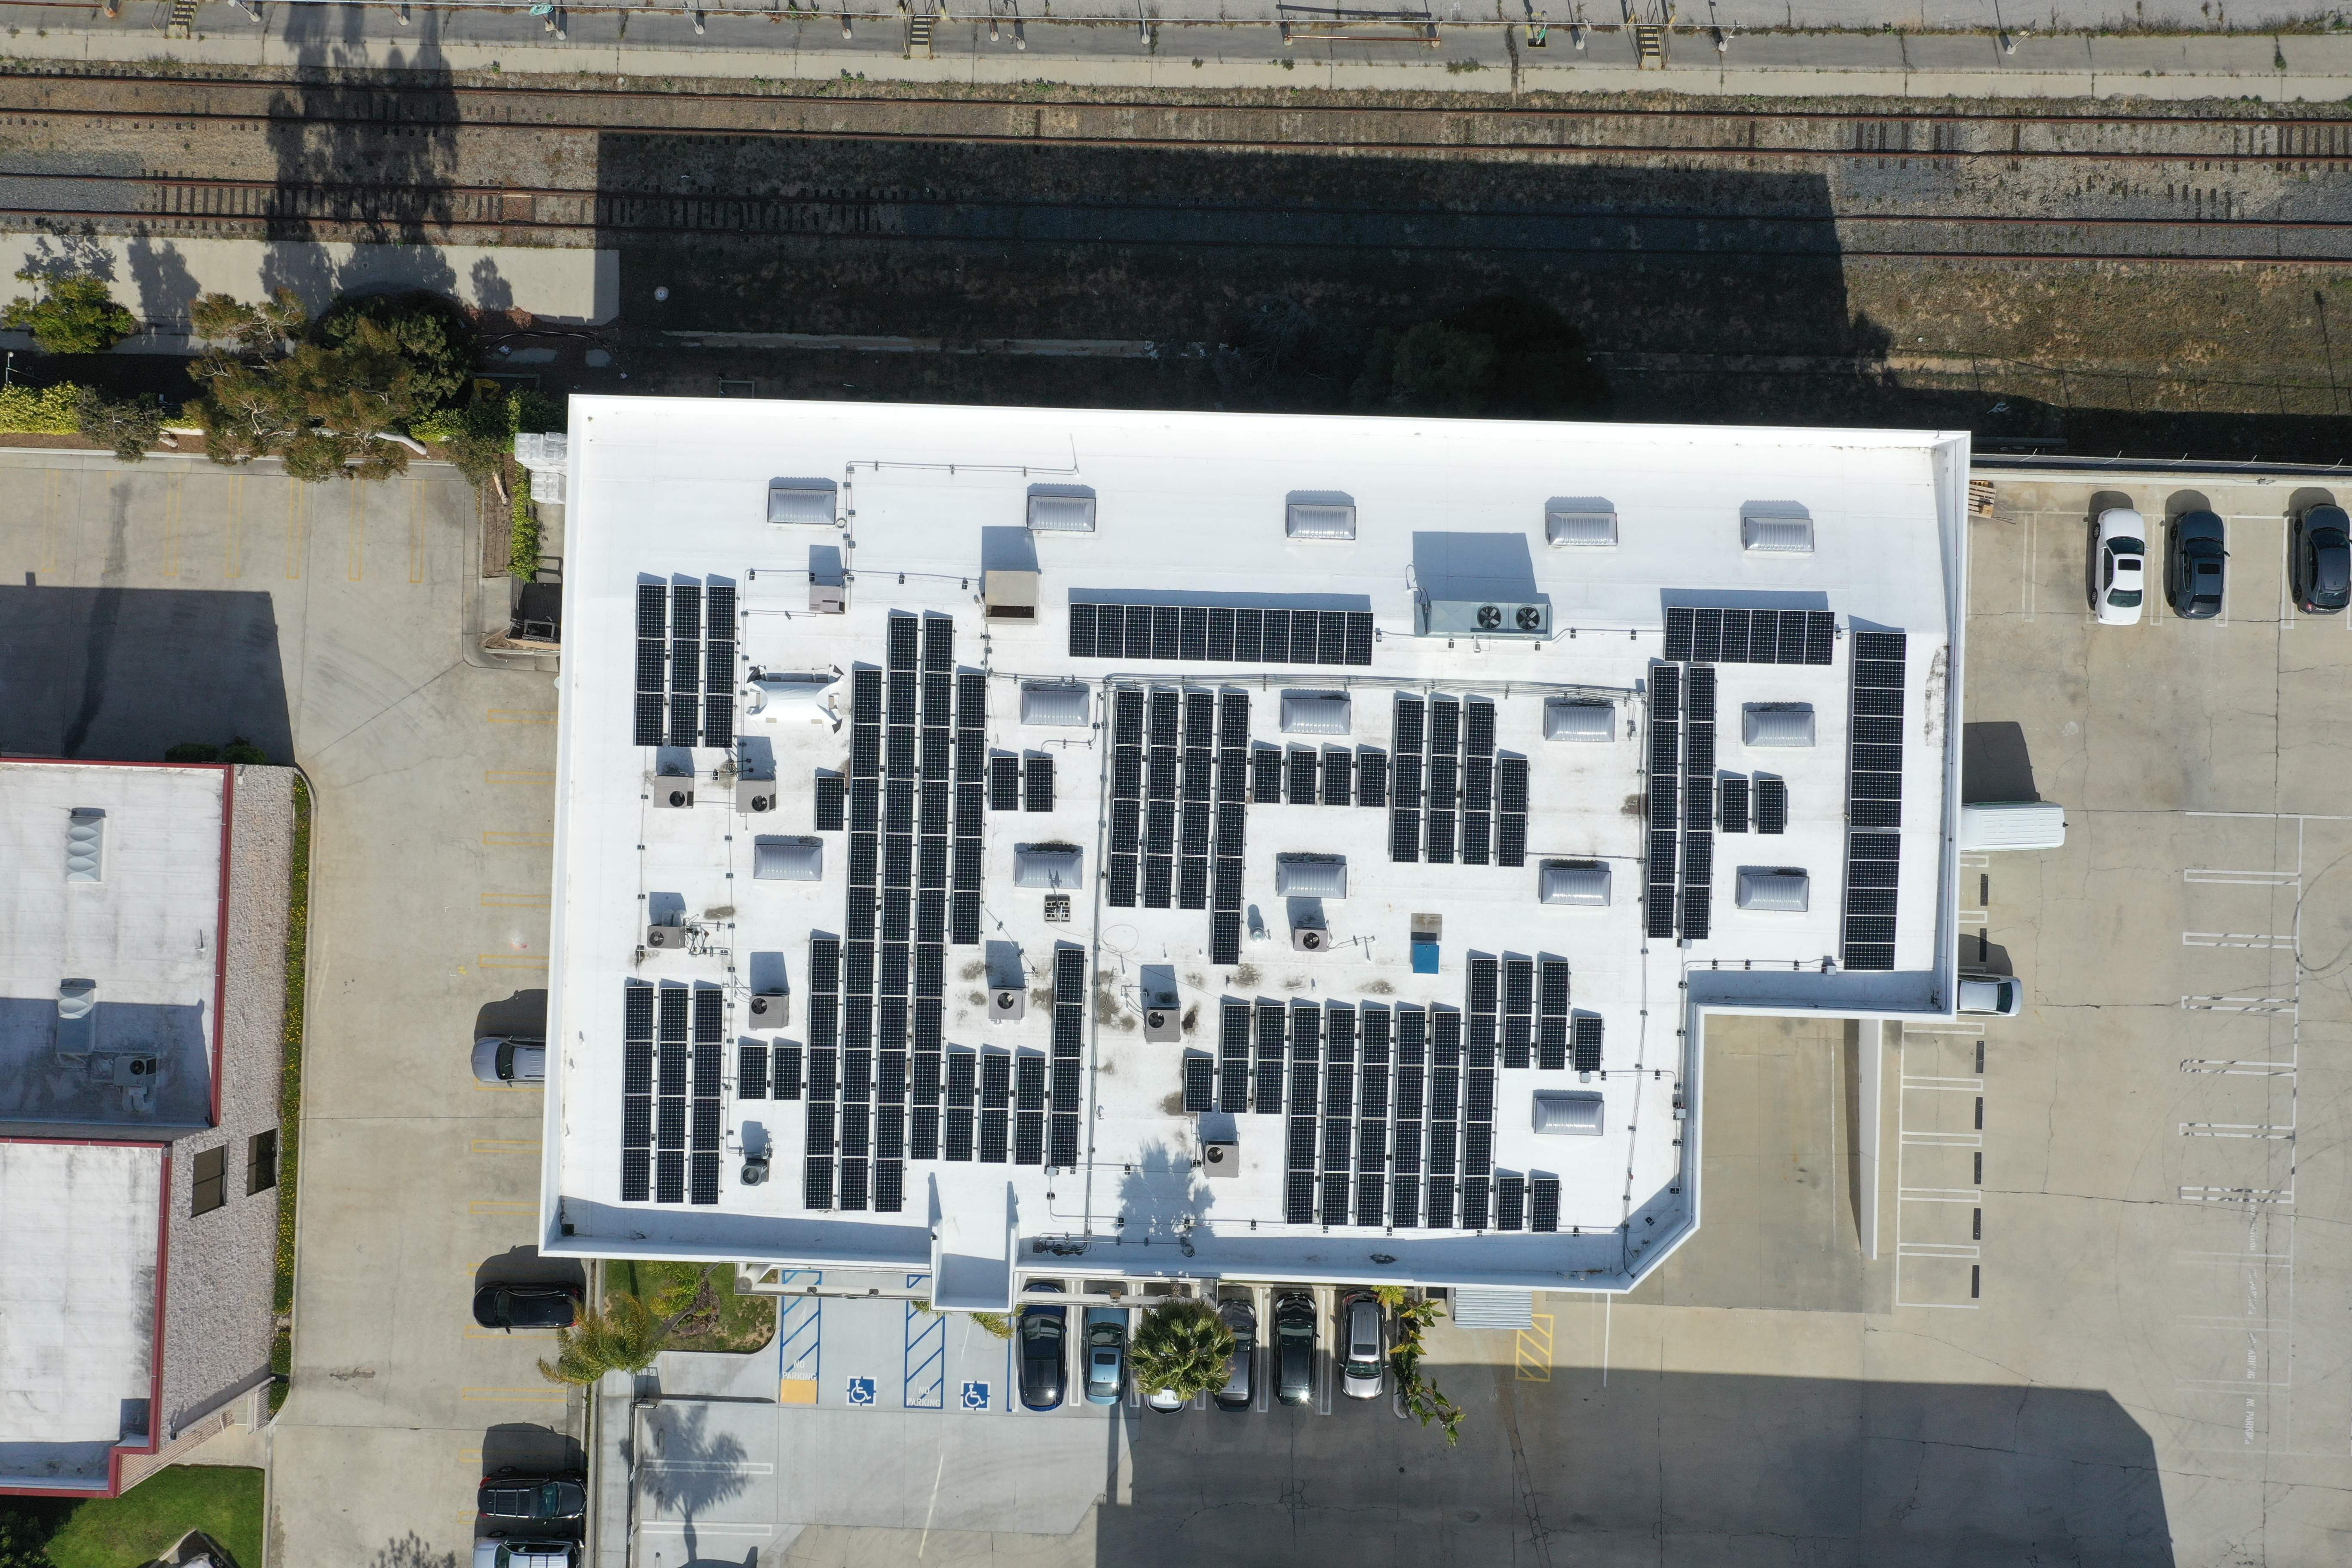 Ariel view of a rooftop solar system.